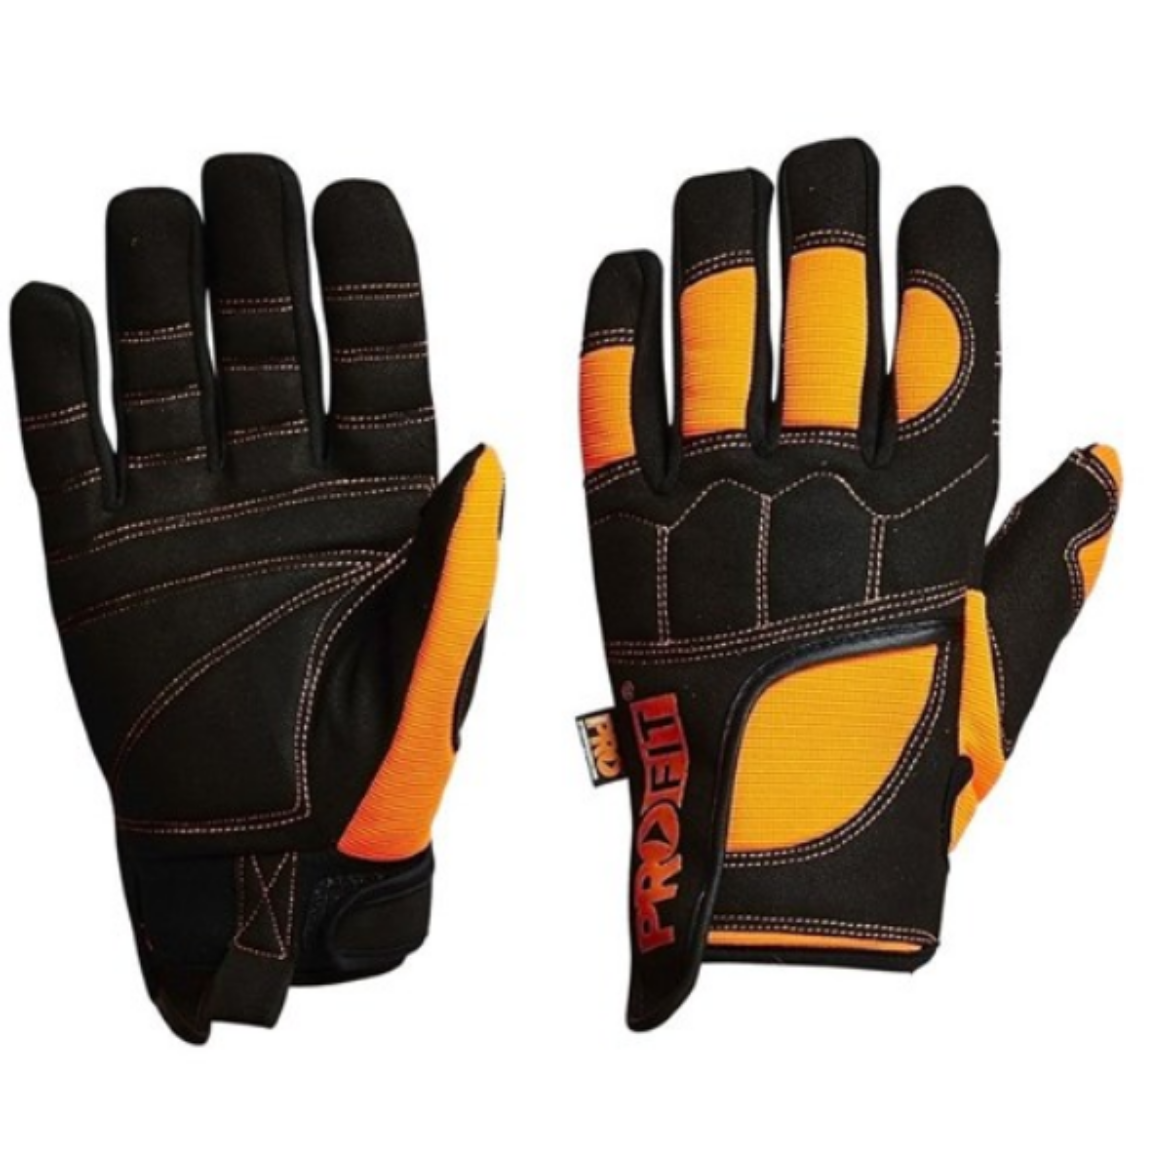 Picture of PRO-VIBE ANTI-VIBRATION GLOVES. AVAILABLE IN SIZES M/L/XL/2XL